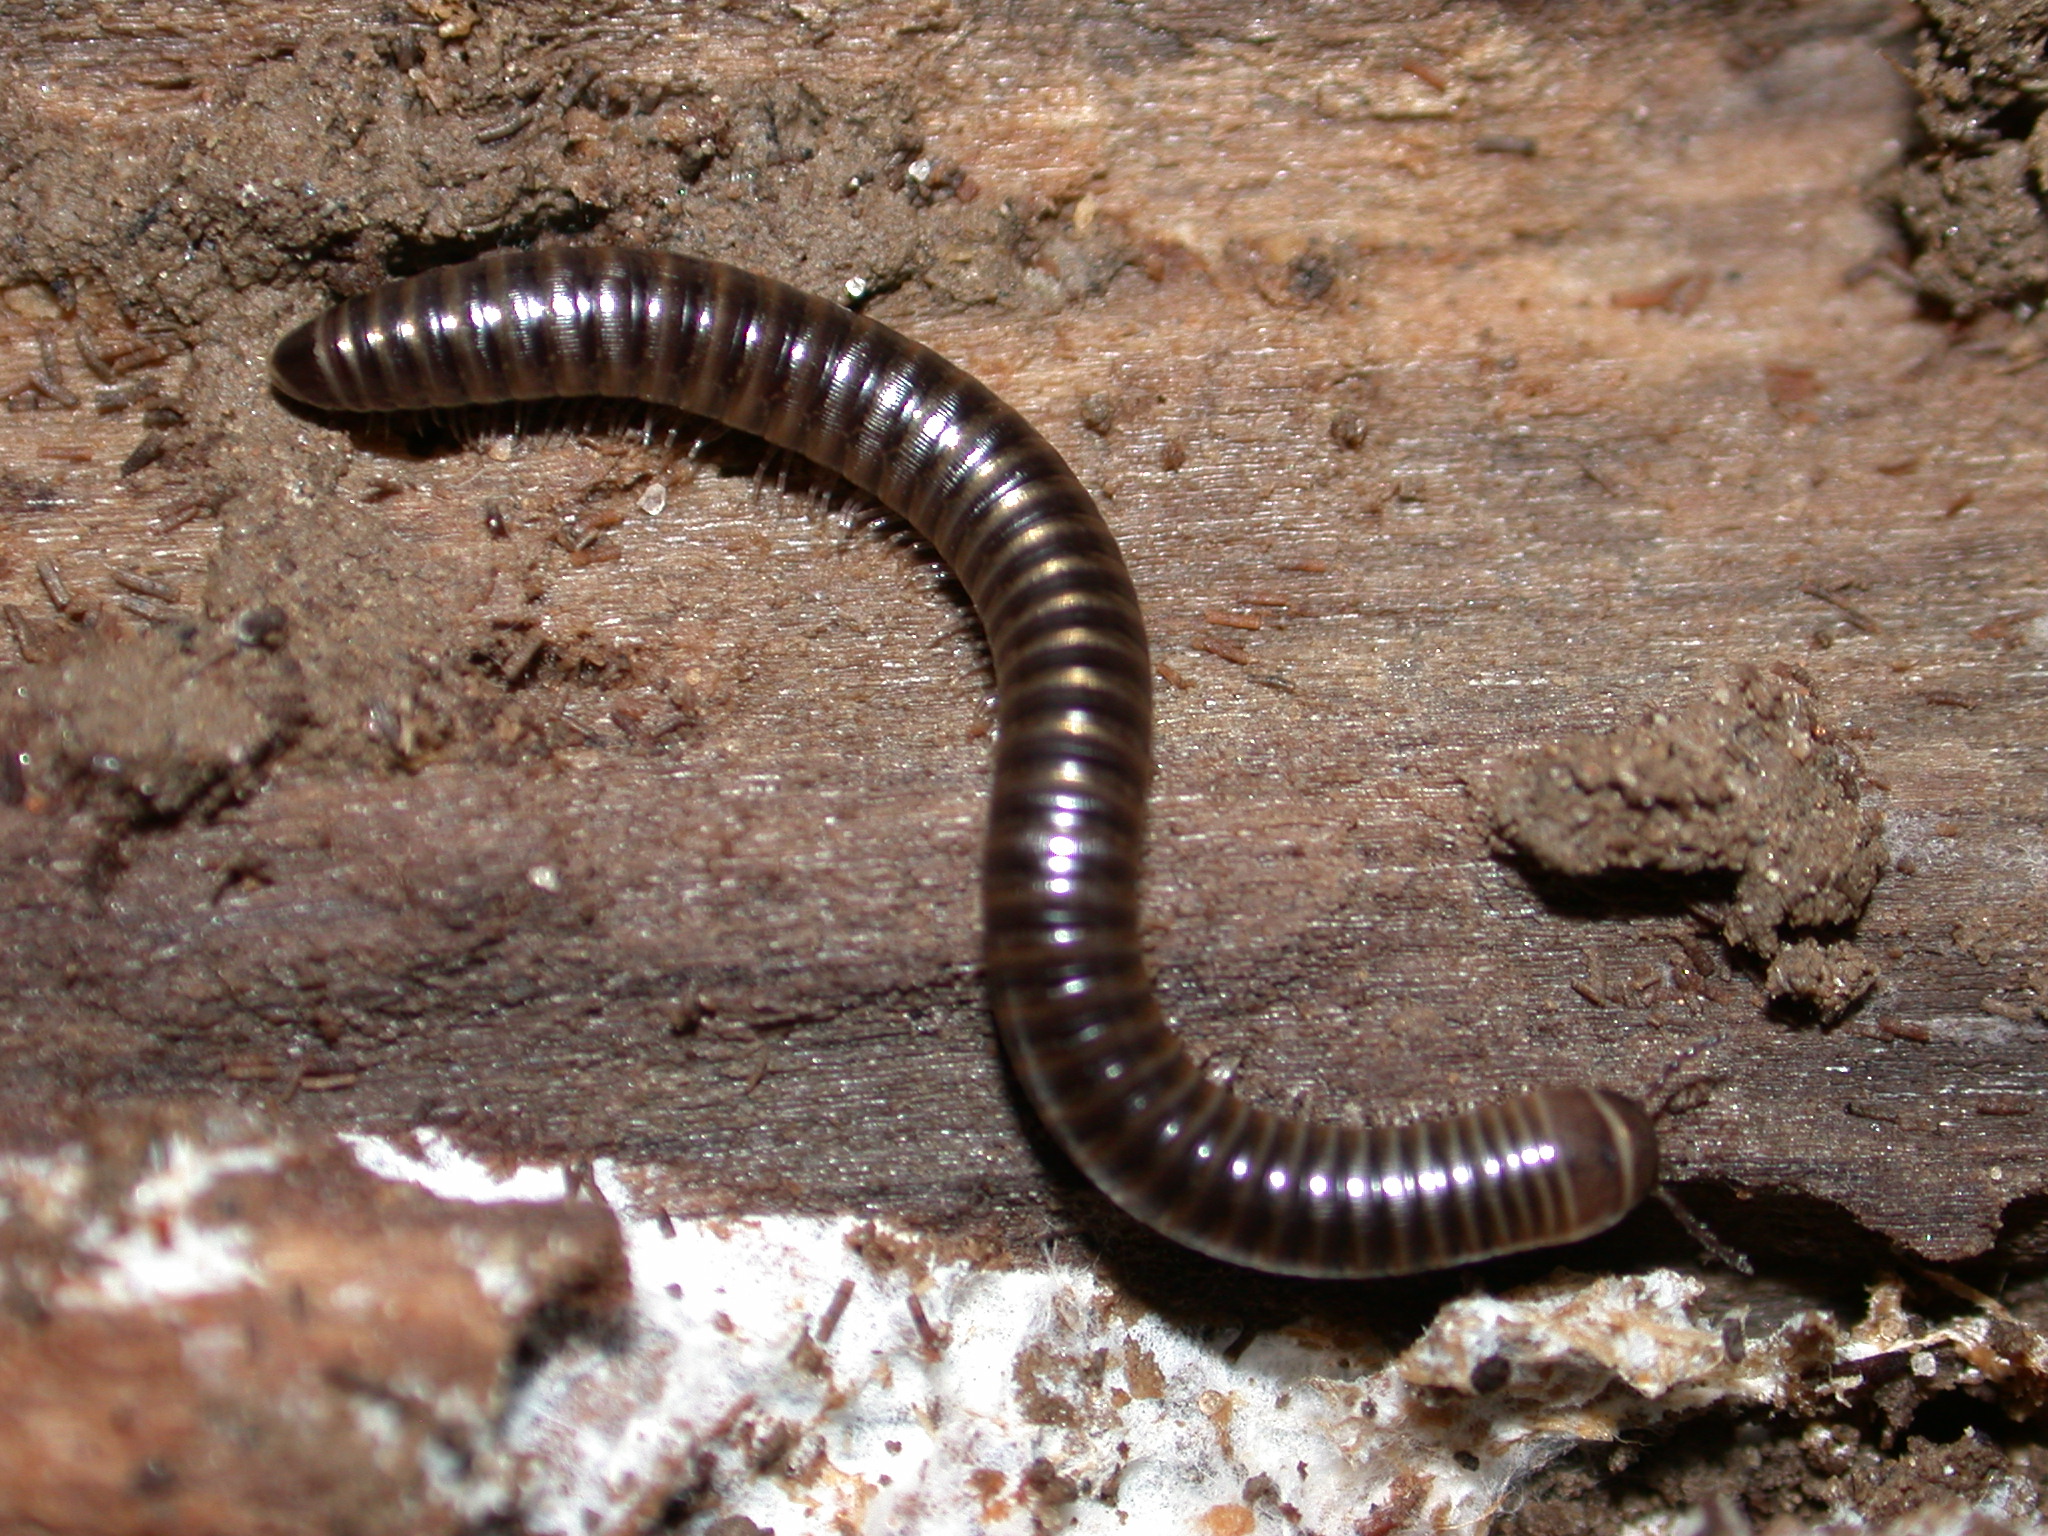 link to millipede information sources